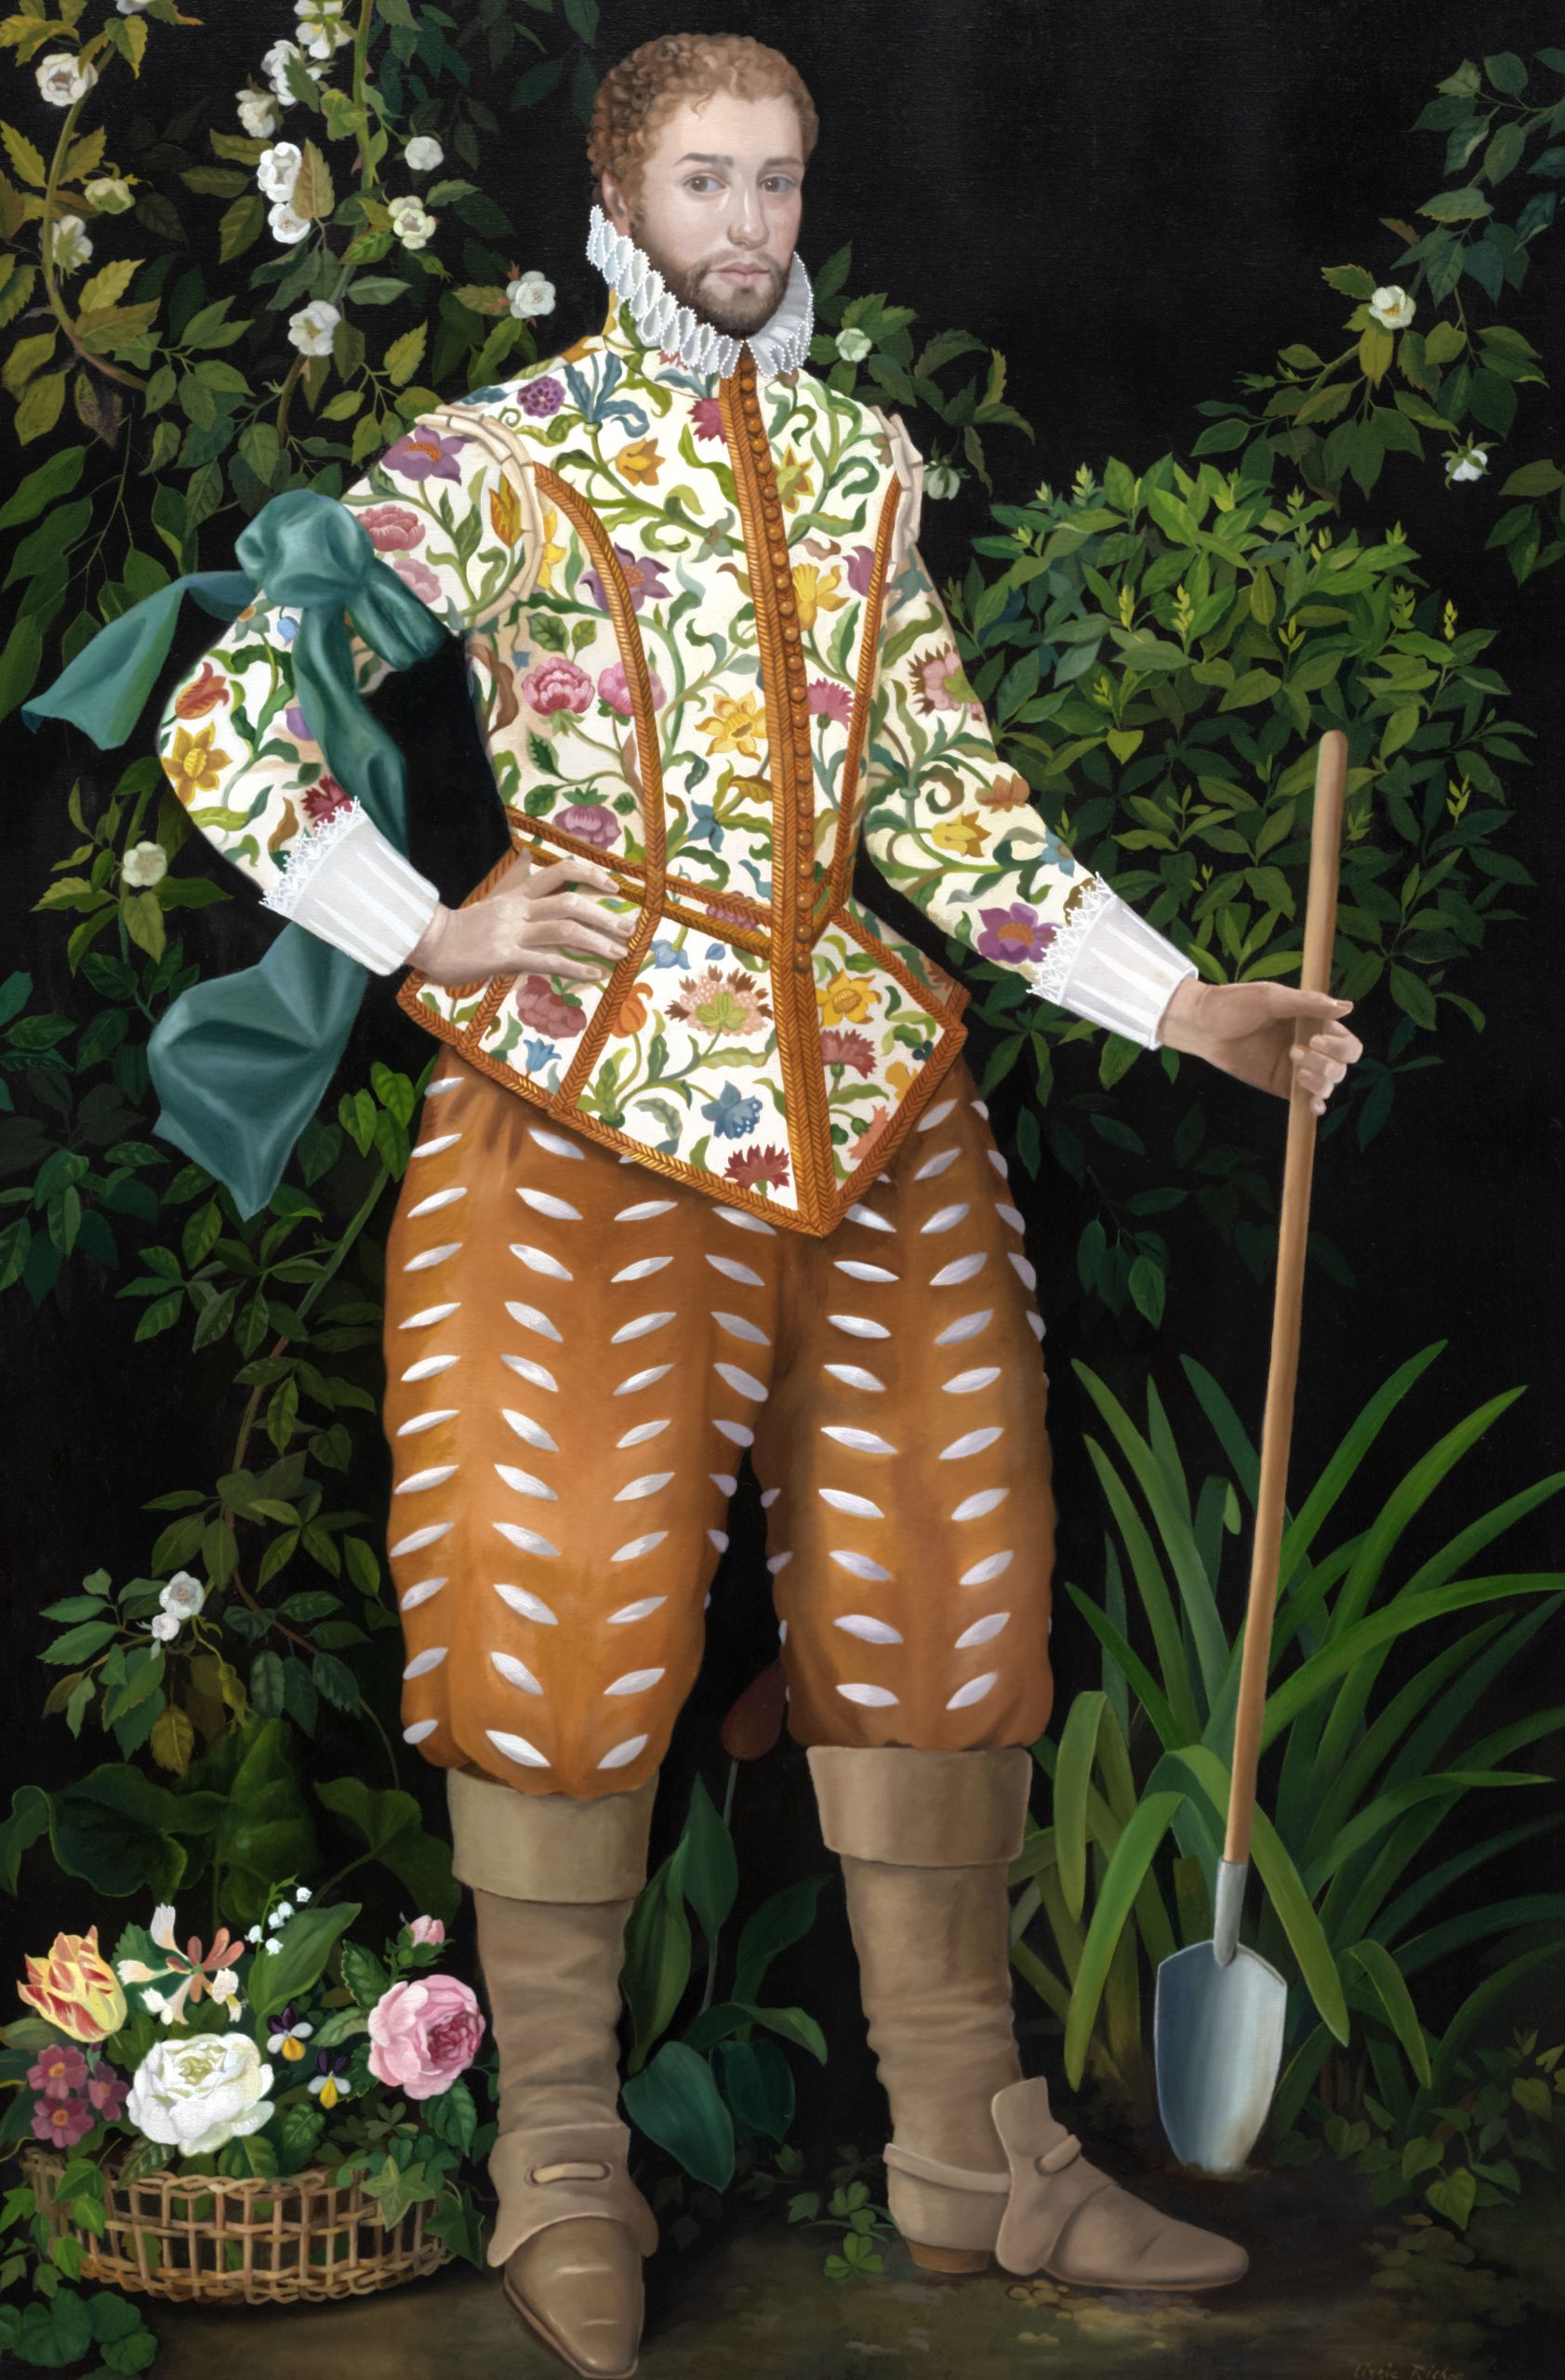 Original Painting by Lizzie Riches